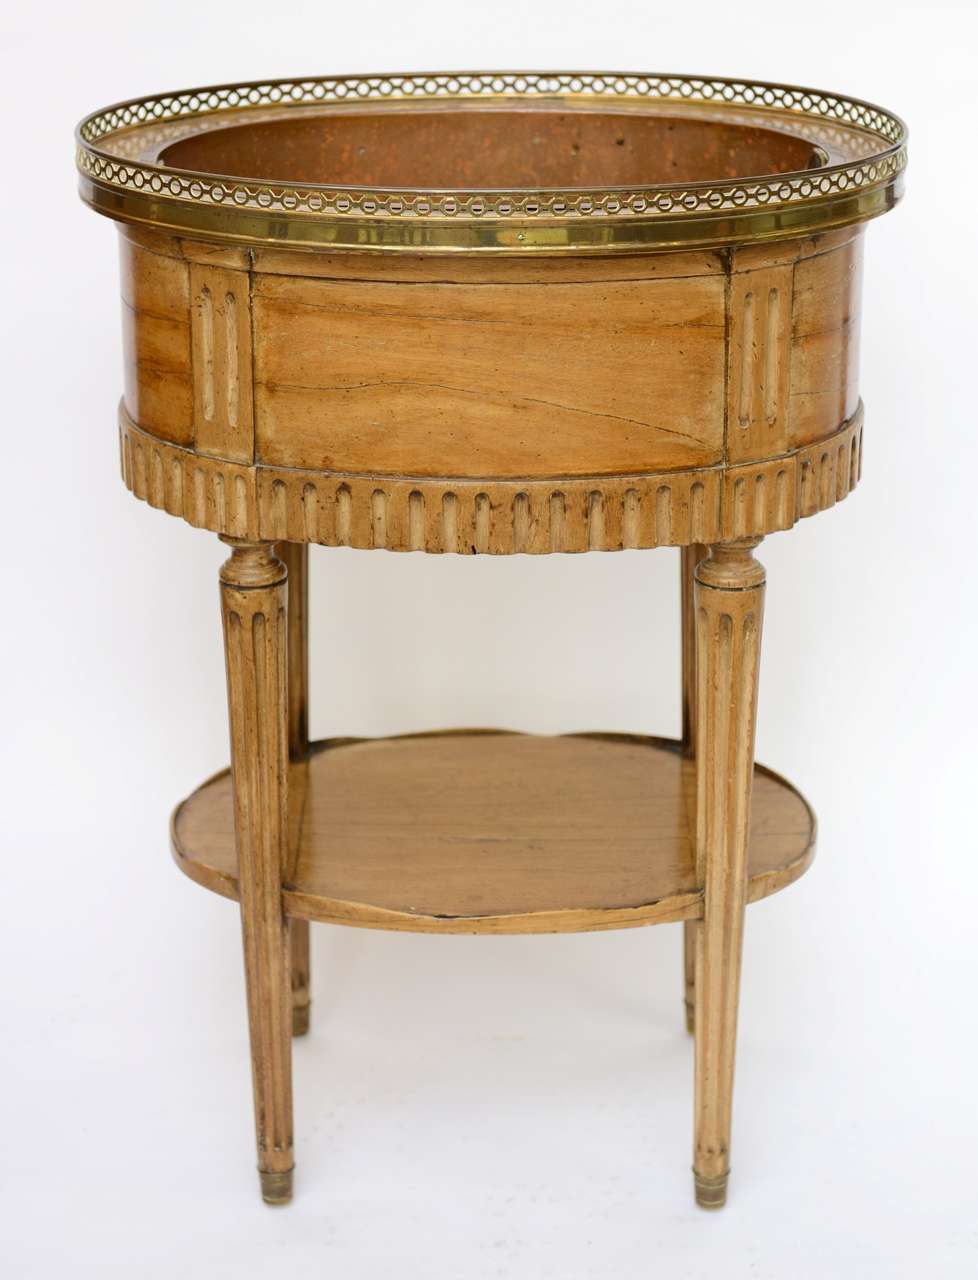 Elegant and beautifully made Wine Cooler.  Could also be used as a planter.  Light fruit wood frame, brass gallery and feet with copper liner, Made and Signed by Don Ruseau.